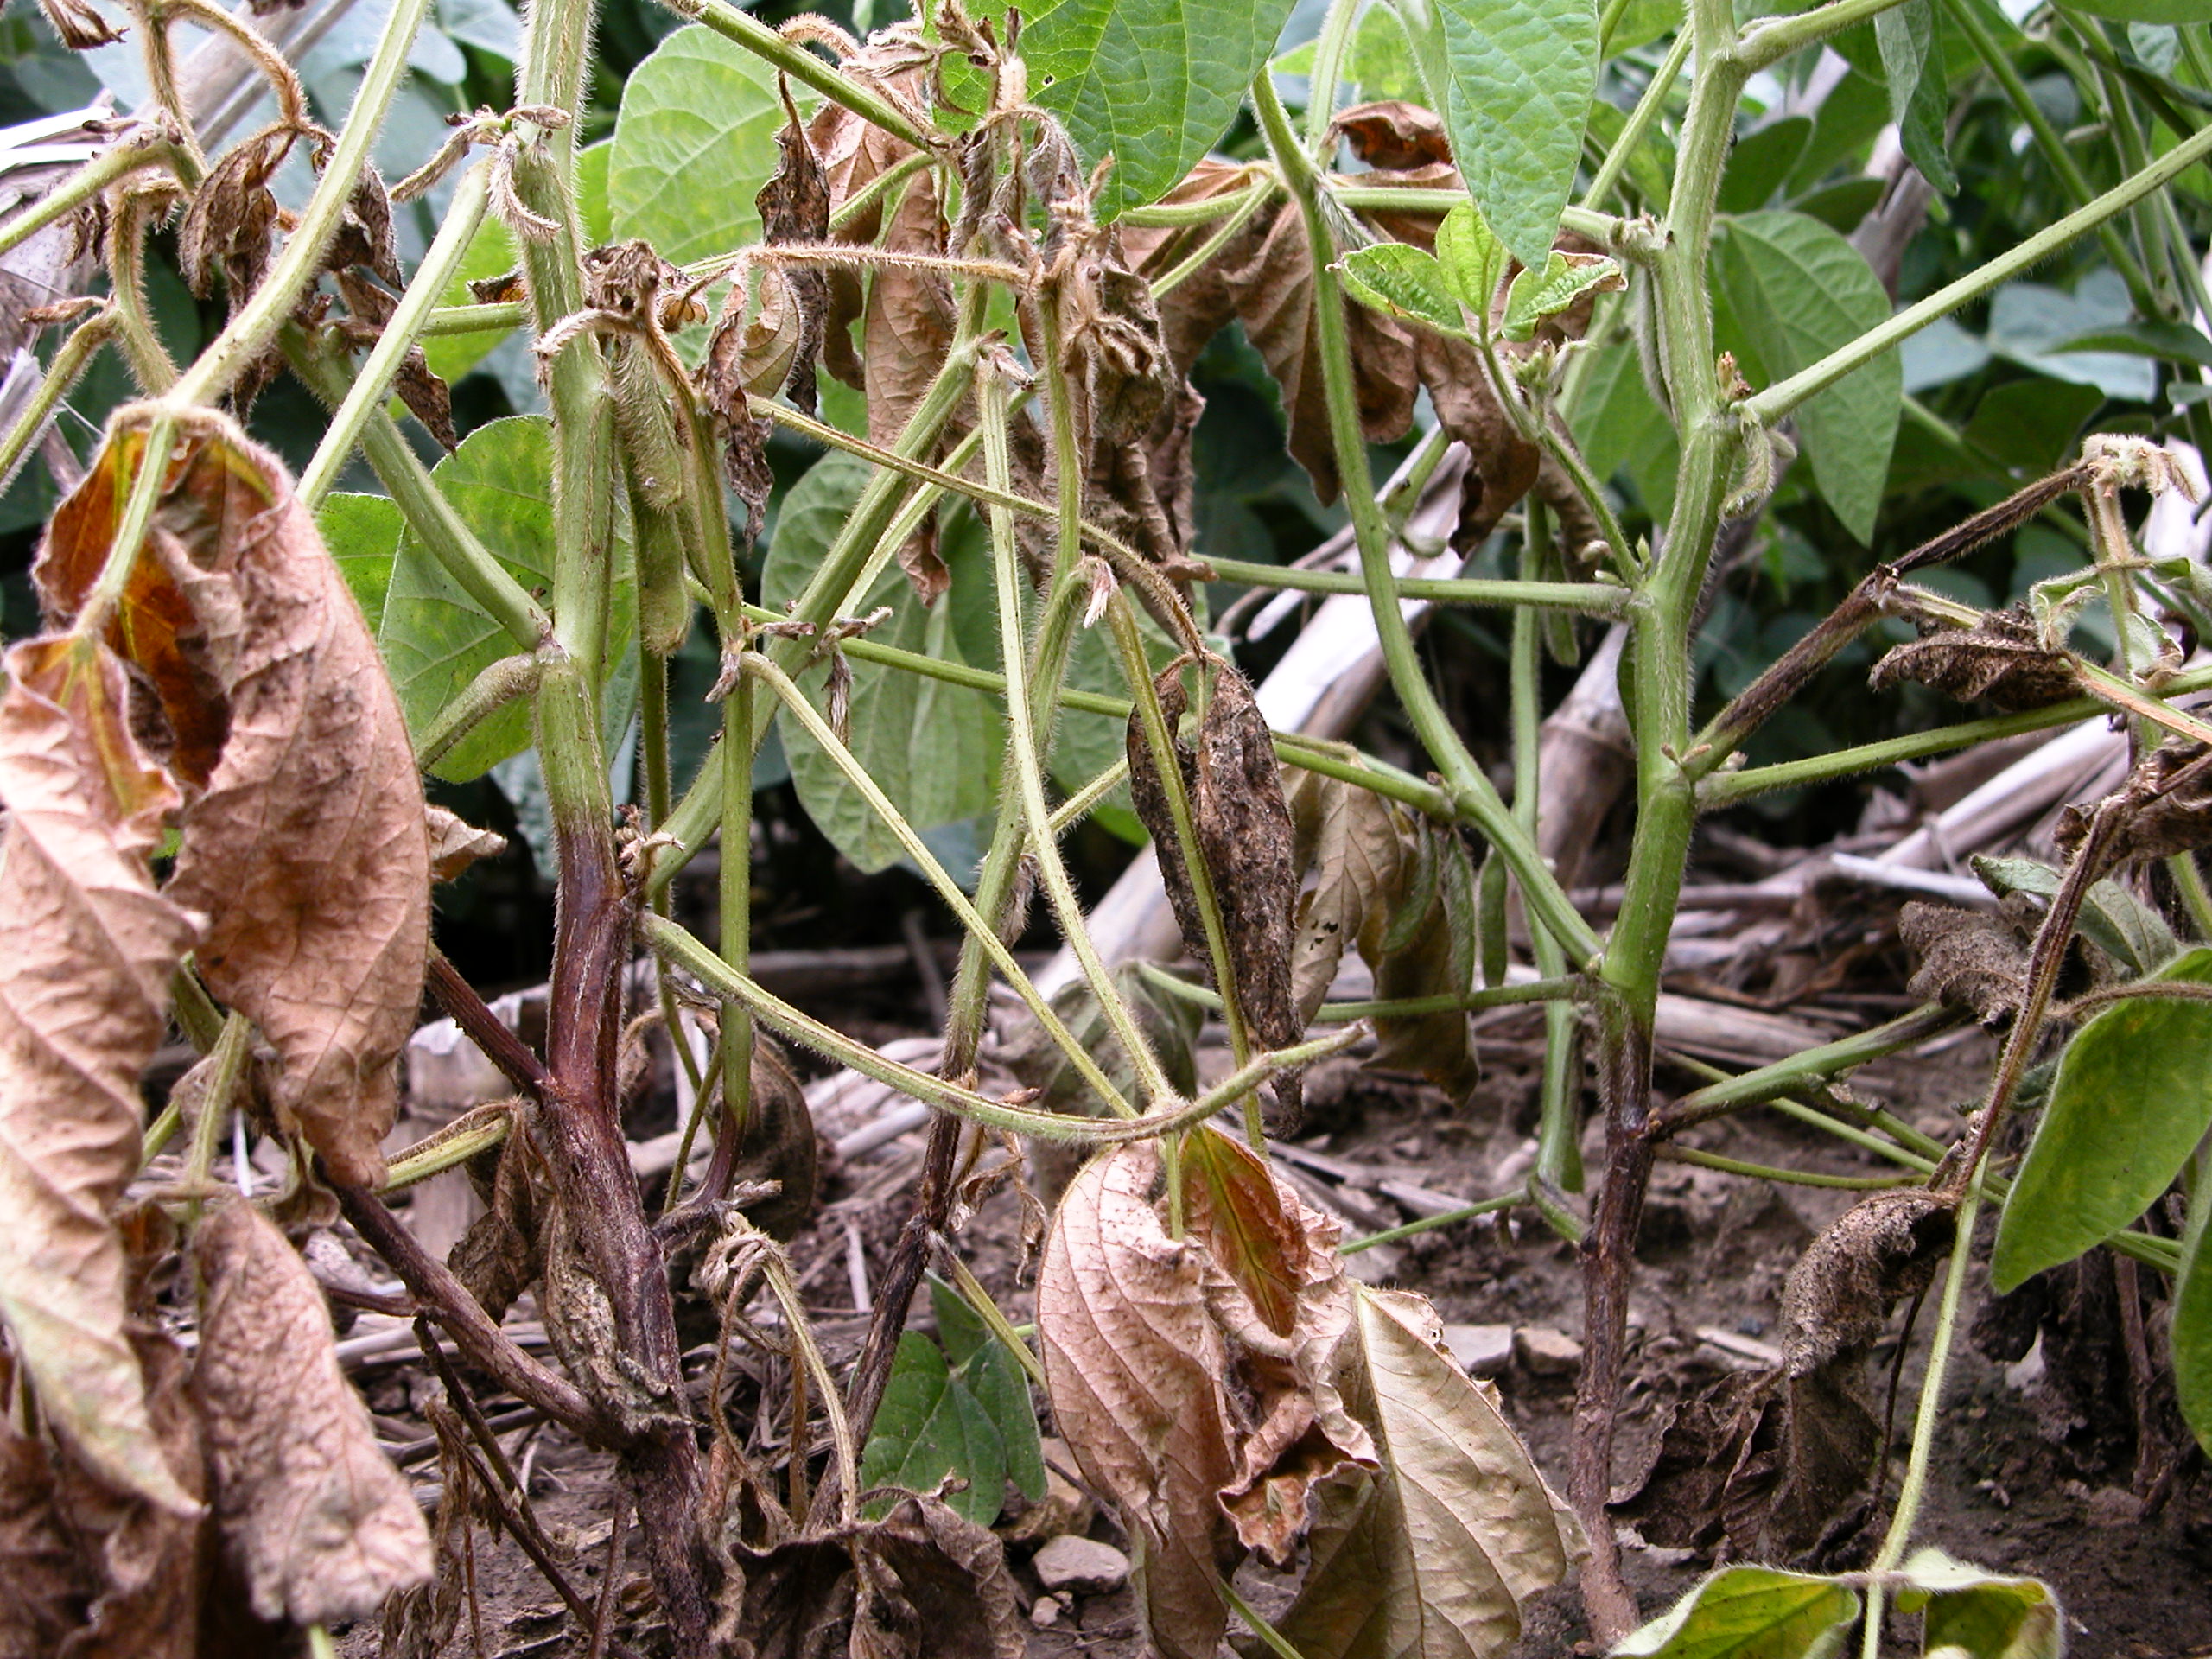 Stem lesions on multiple soybean plants resulting from Phytophthora infection.